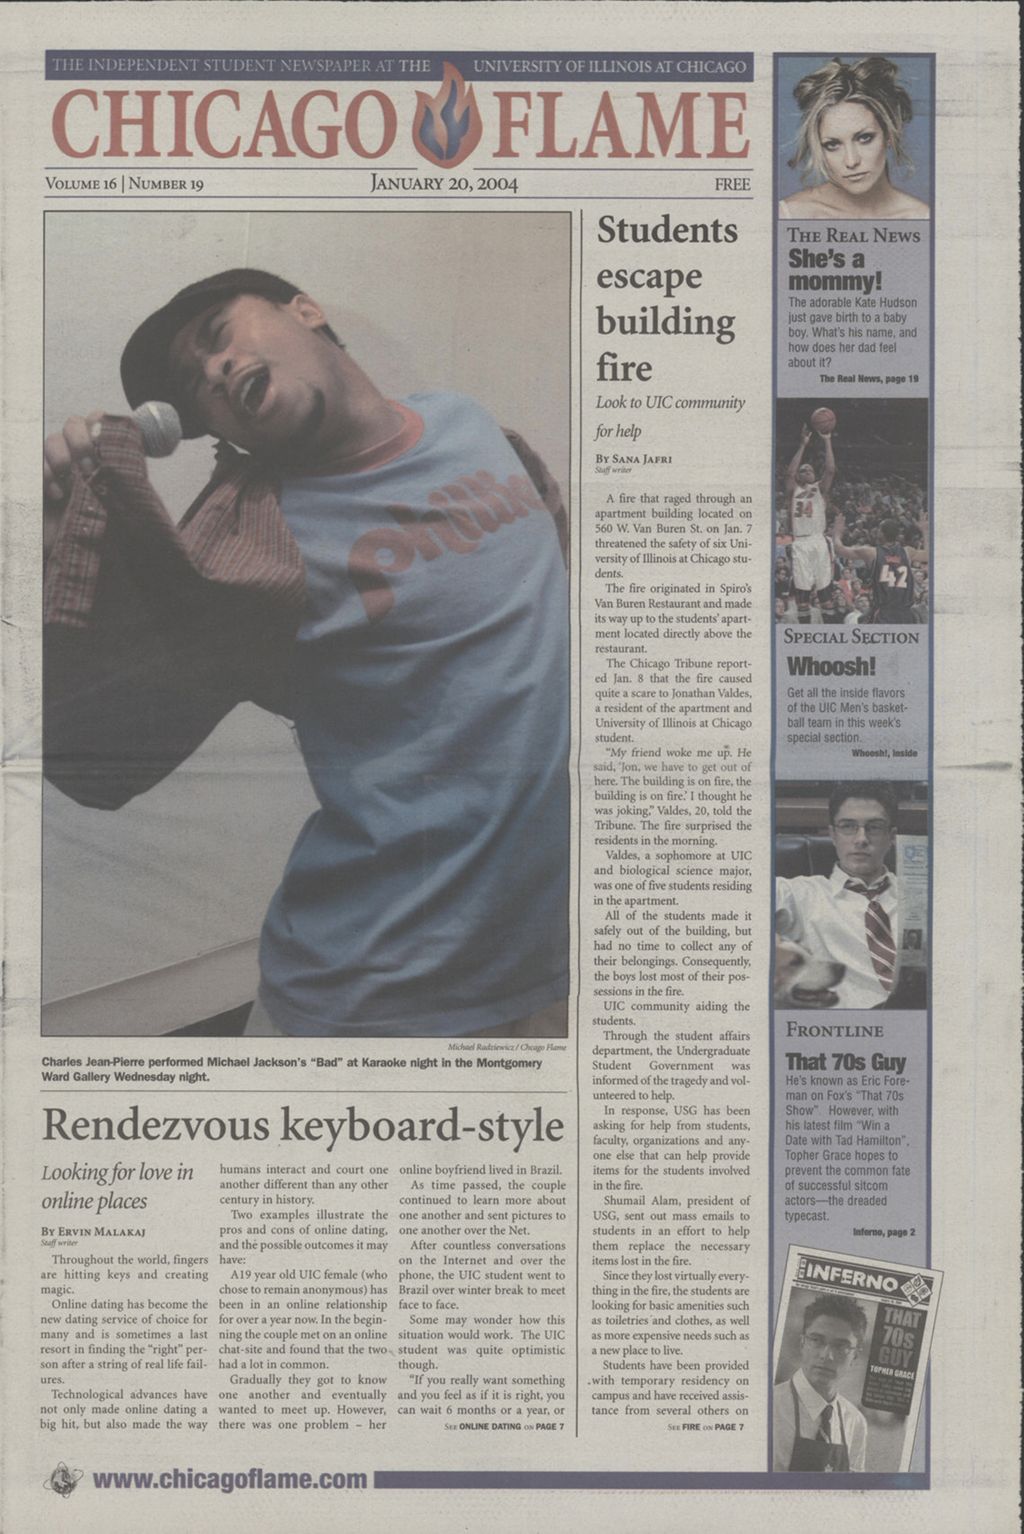 Chicago Flame (January 20, 2004)